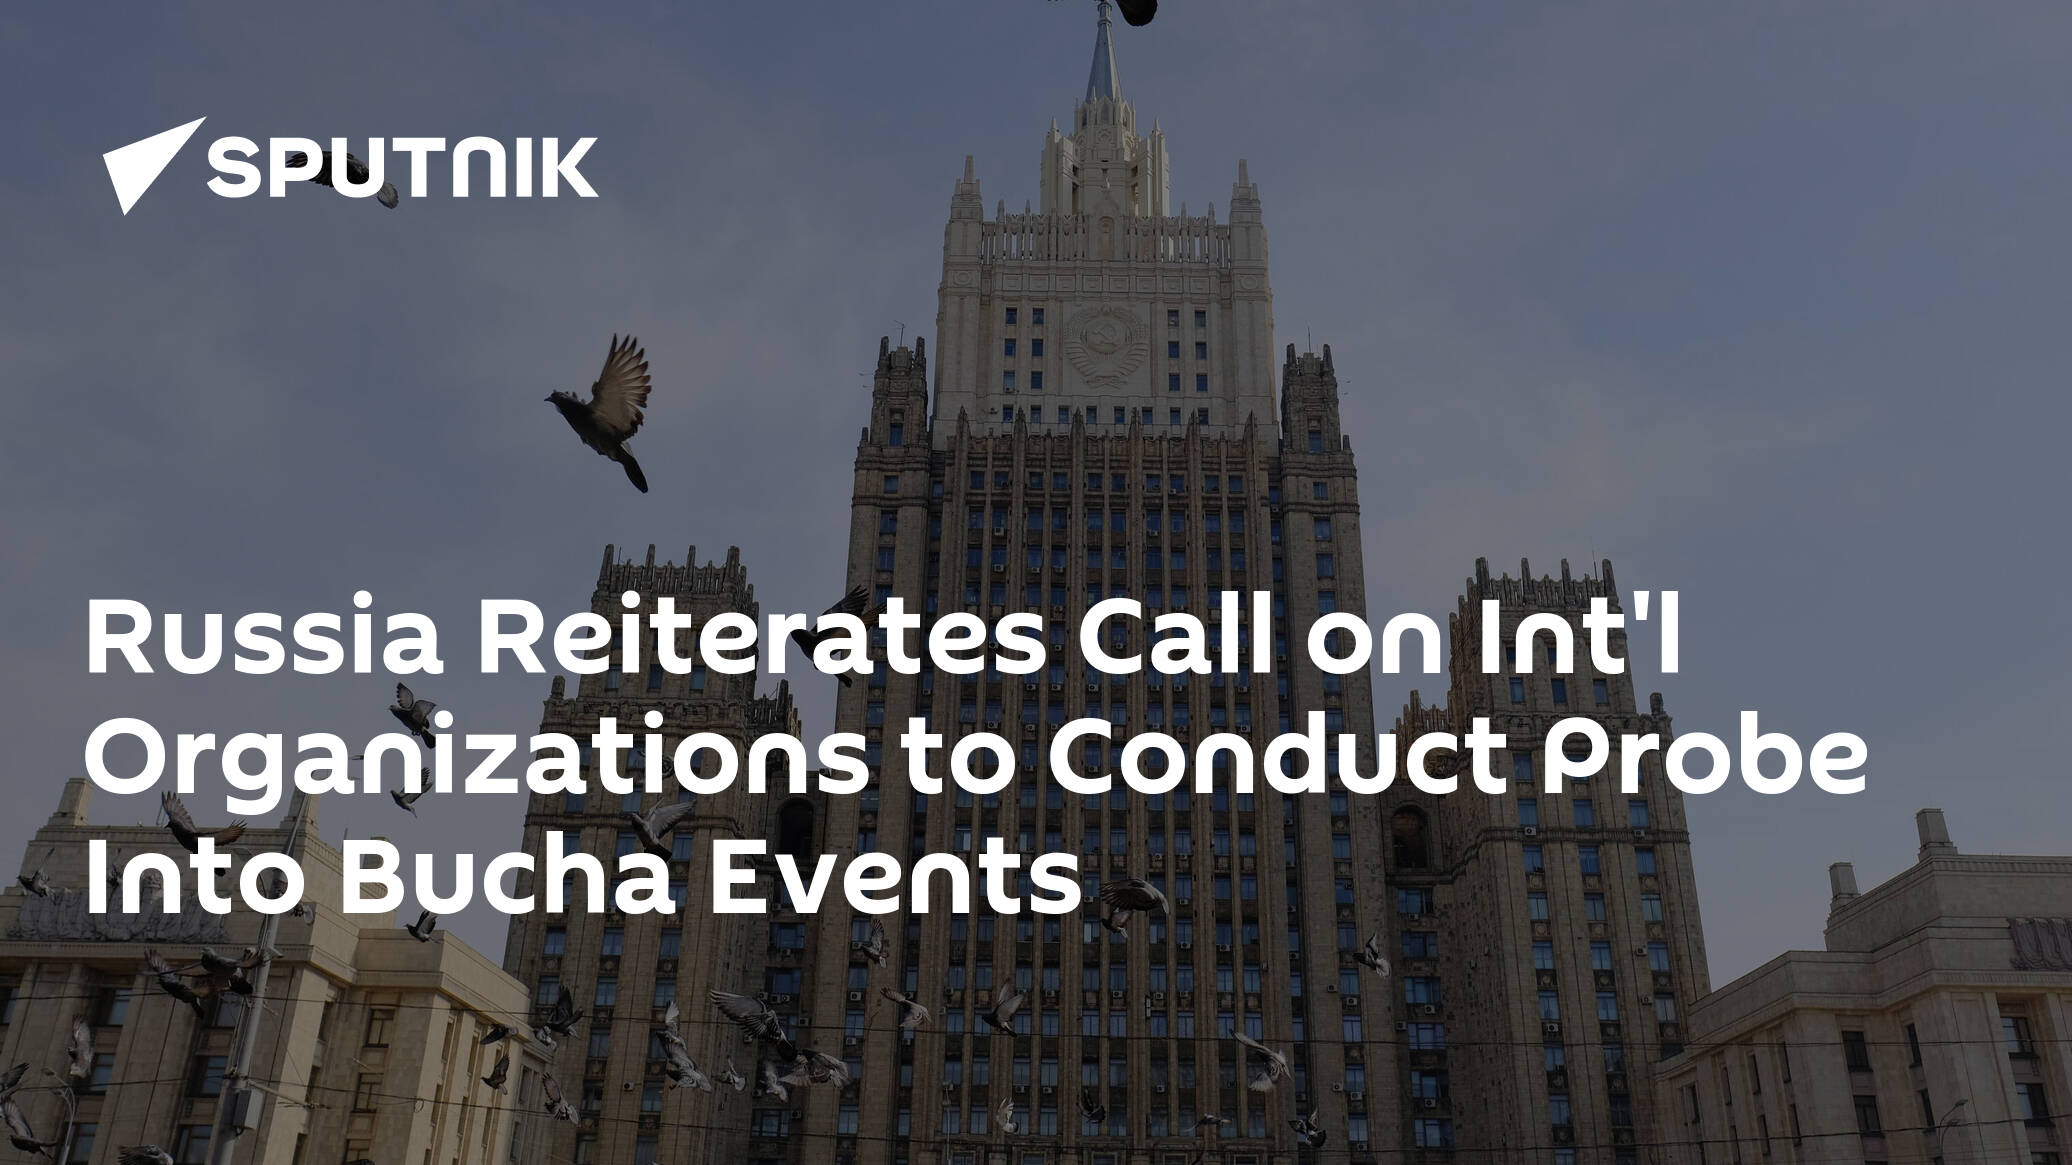 Russia Reiterates Call on Int'l Organizations to Conduct Probe Into Bucha Events